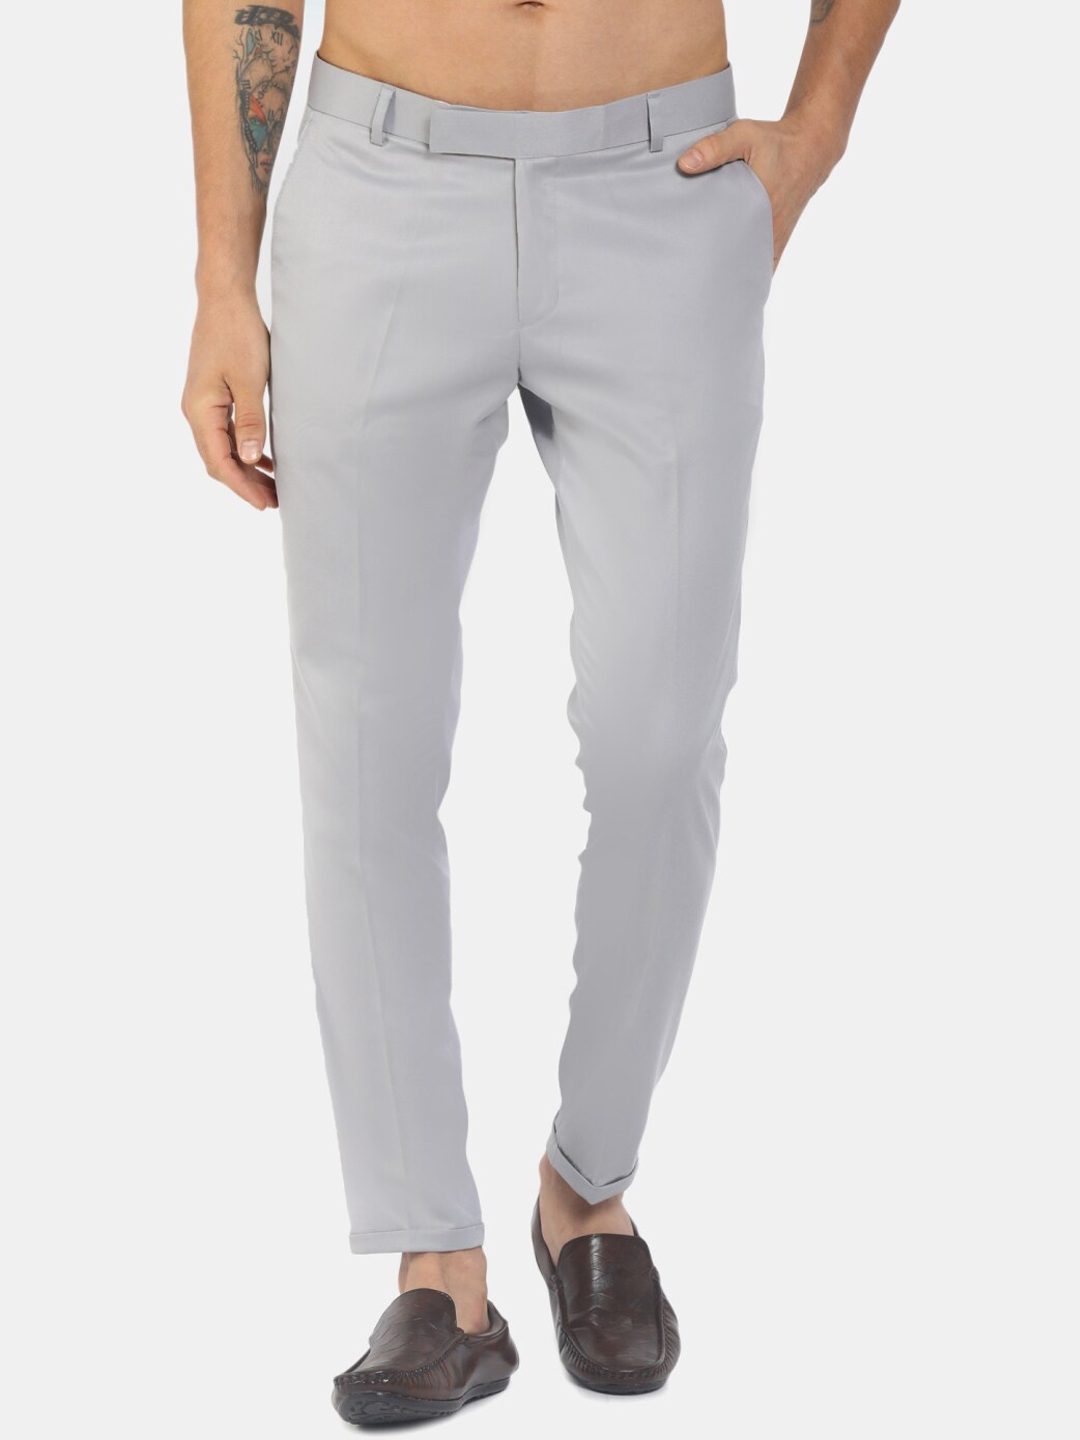 Buy J White By Vmart Men Grey Classic Formal Trousers - Trousers for ...